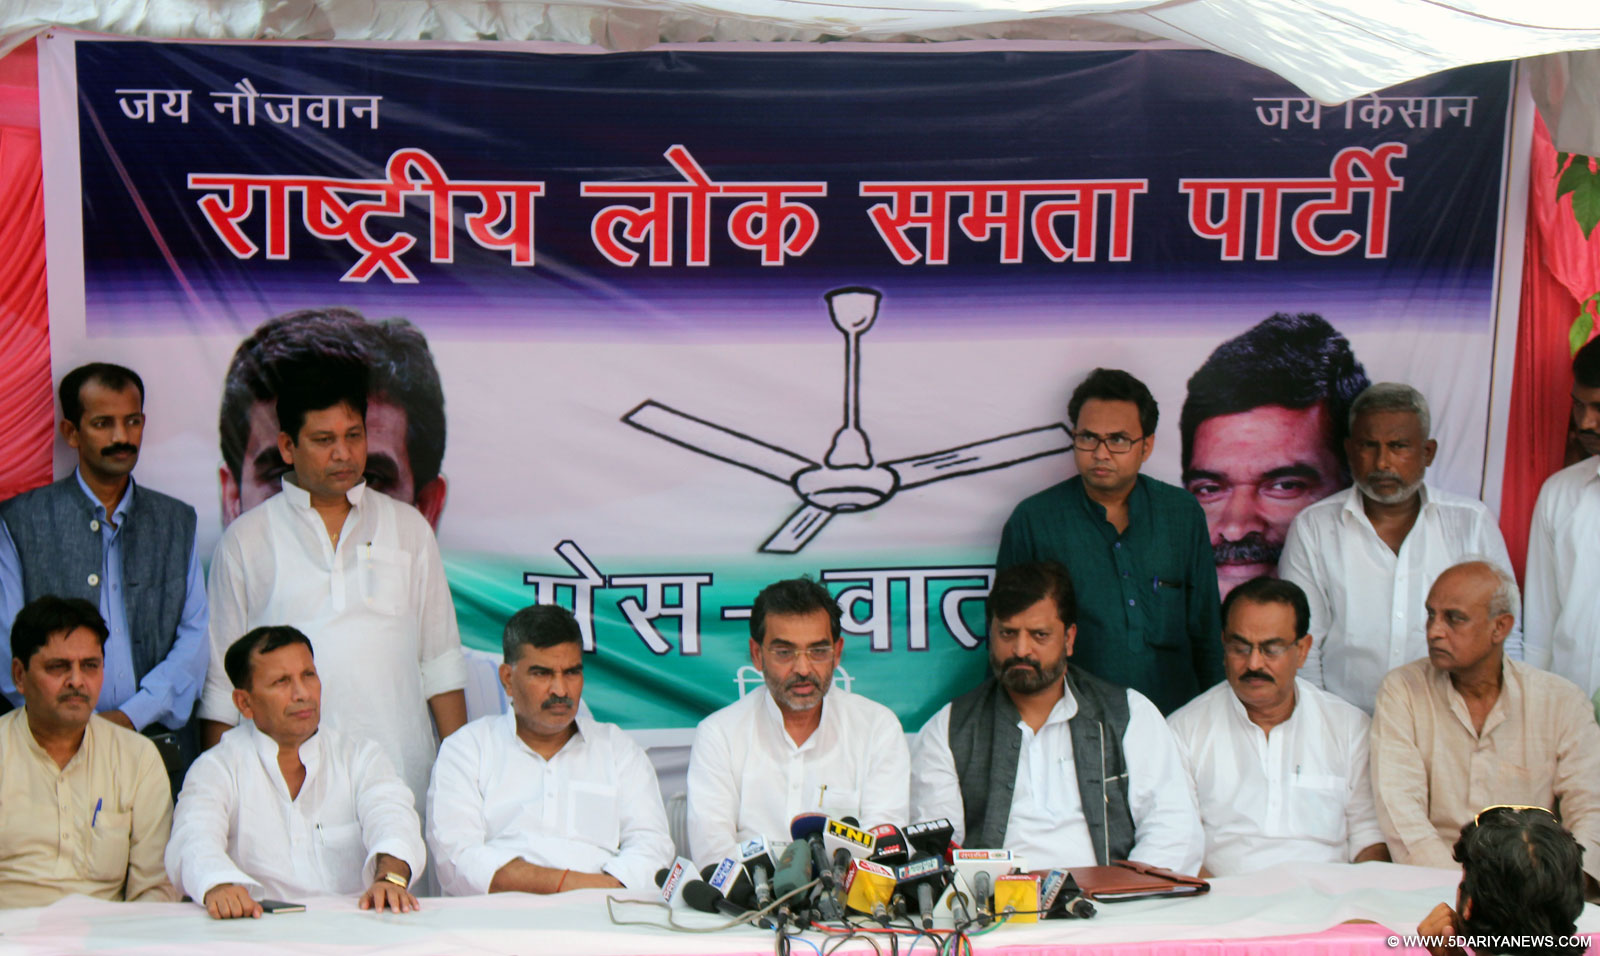 Rashtriya Lok Samata Party chief Upendra Kushwaha during a press conference to announce the names of the candidates contesting the upcoming Bihar assembly polls in New Delhi, on Sep 21, 2015.